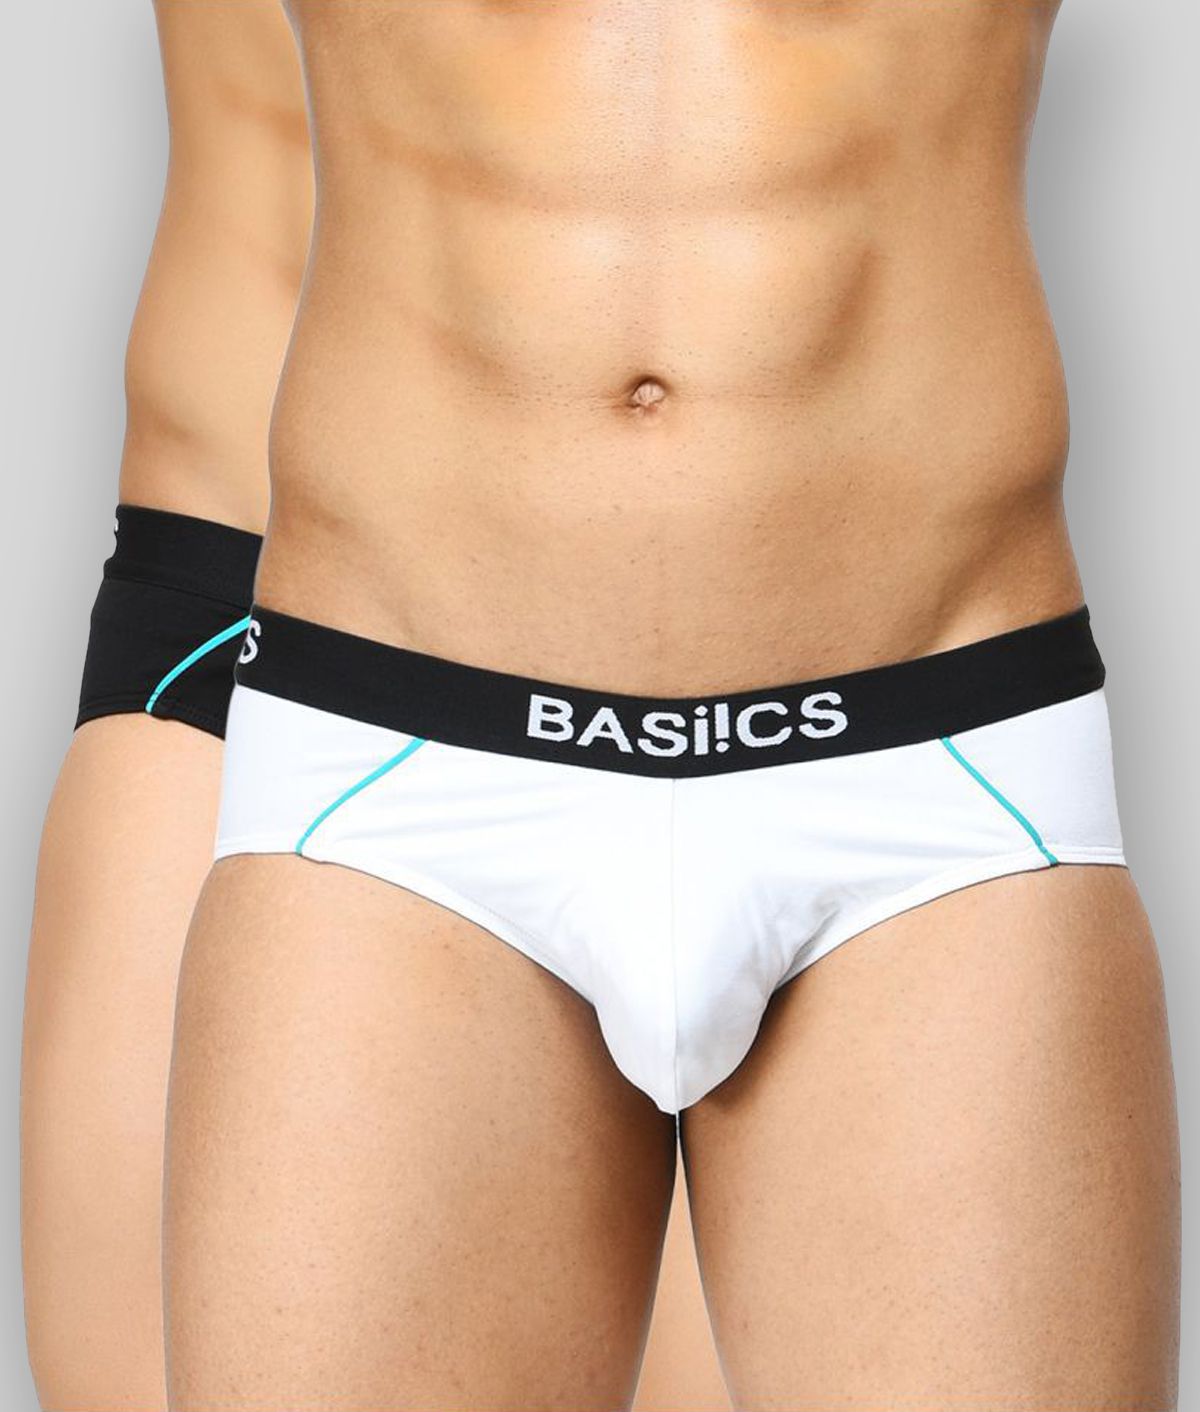     			BASIICS By La Intimo - White 100% Cotton Men's Briefs ( Pack of 2 )